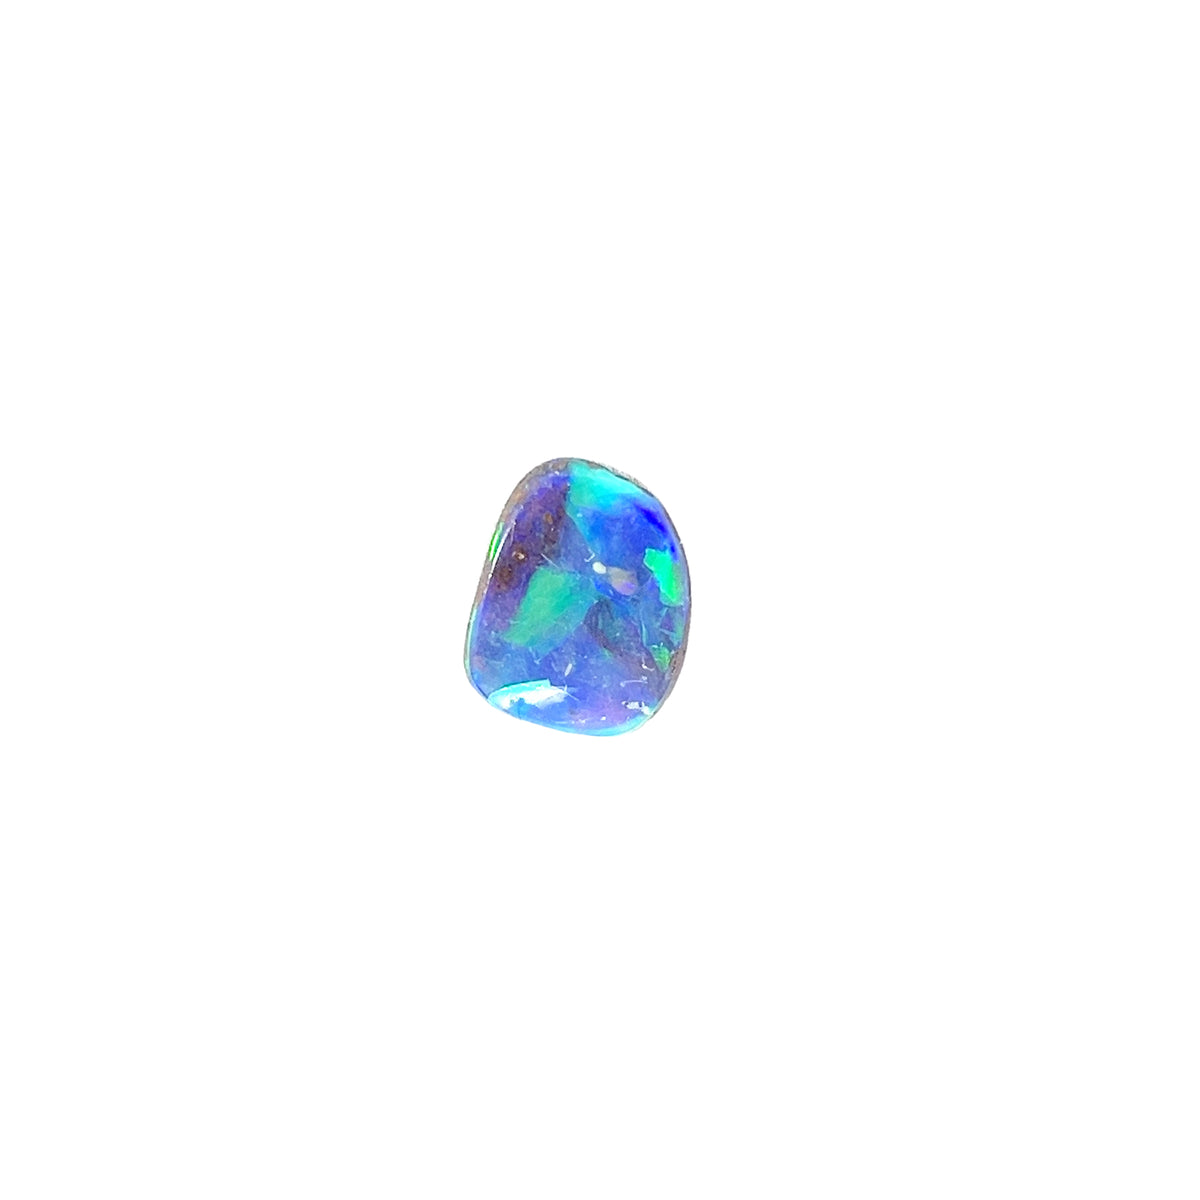 GIA Certified Free Form Black Opal 2.83cts